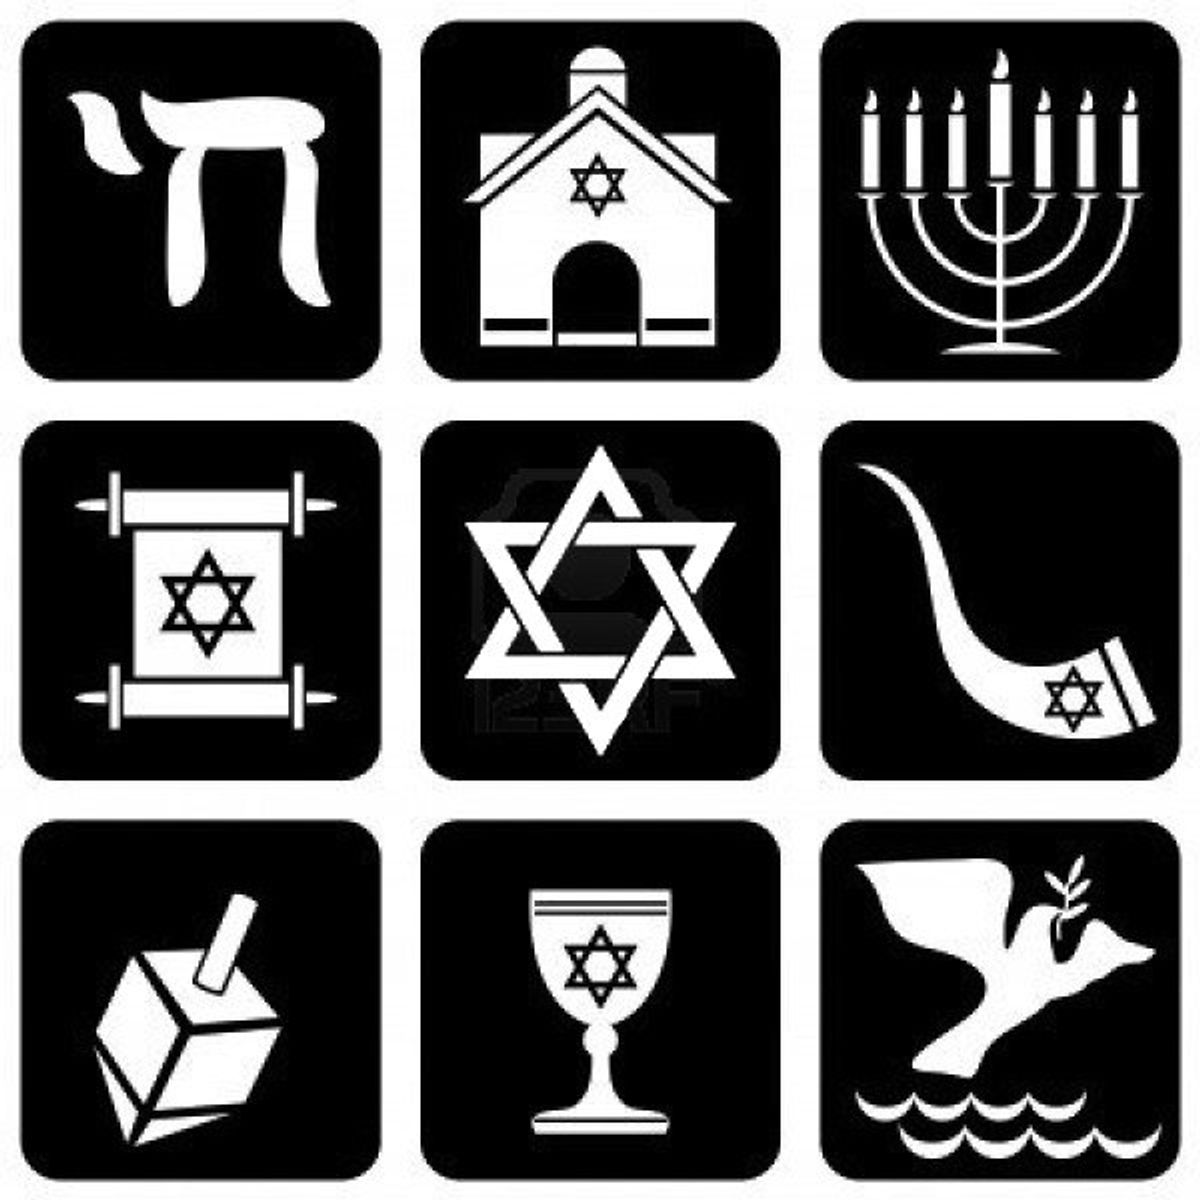 How Can I Be Jewish?